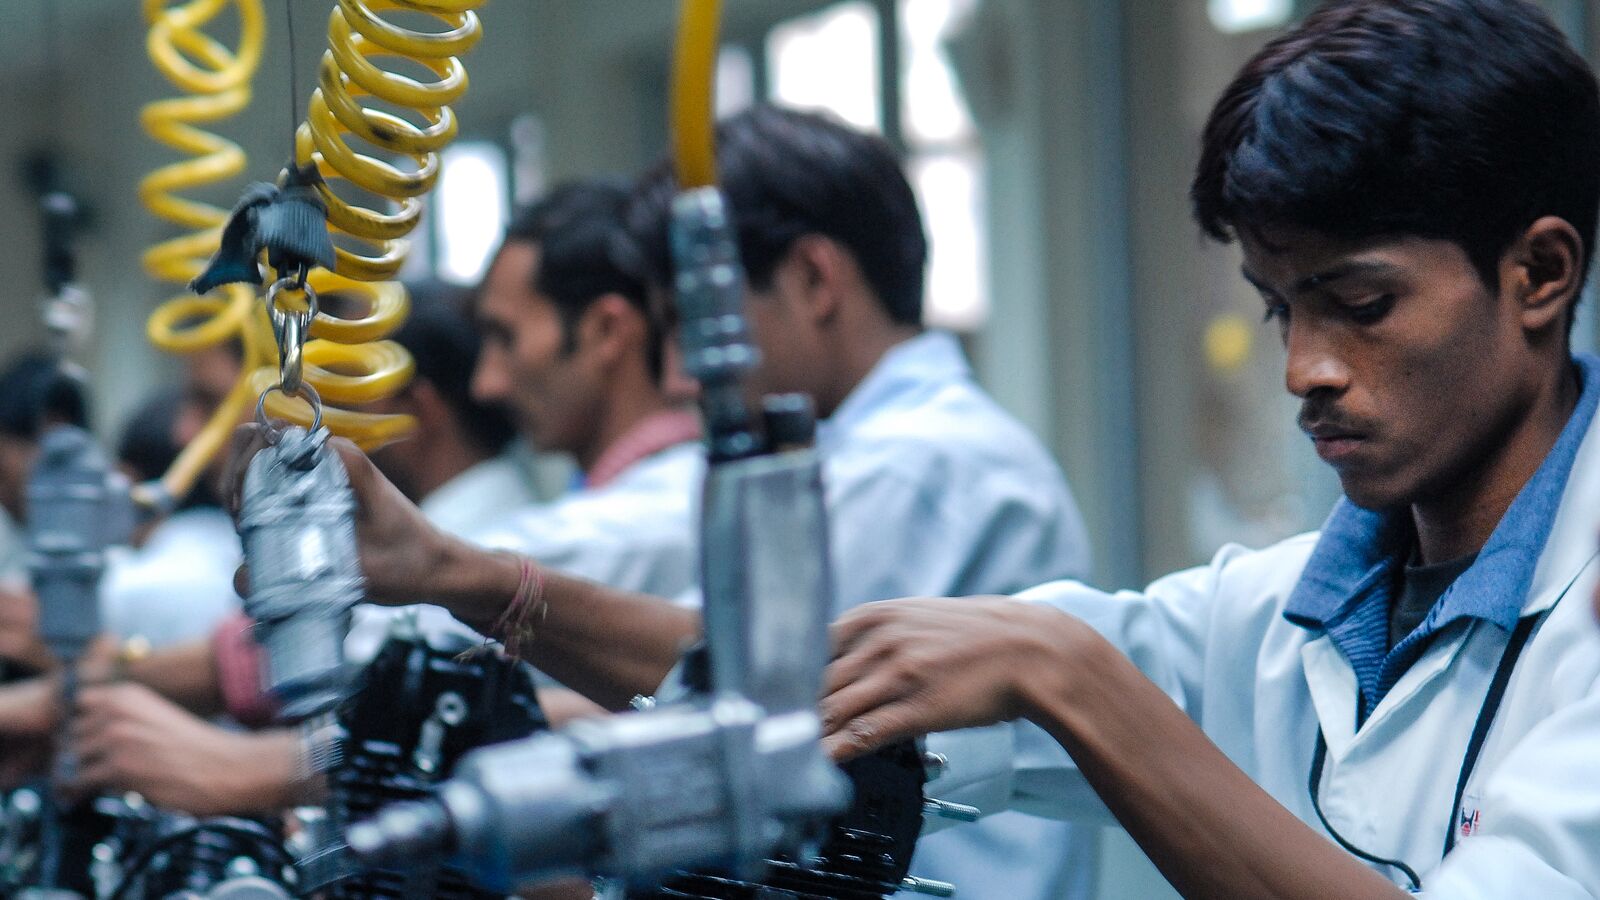 Gig workers in India complete tasks in a factory setting